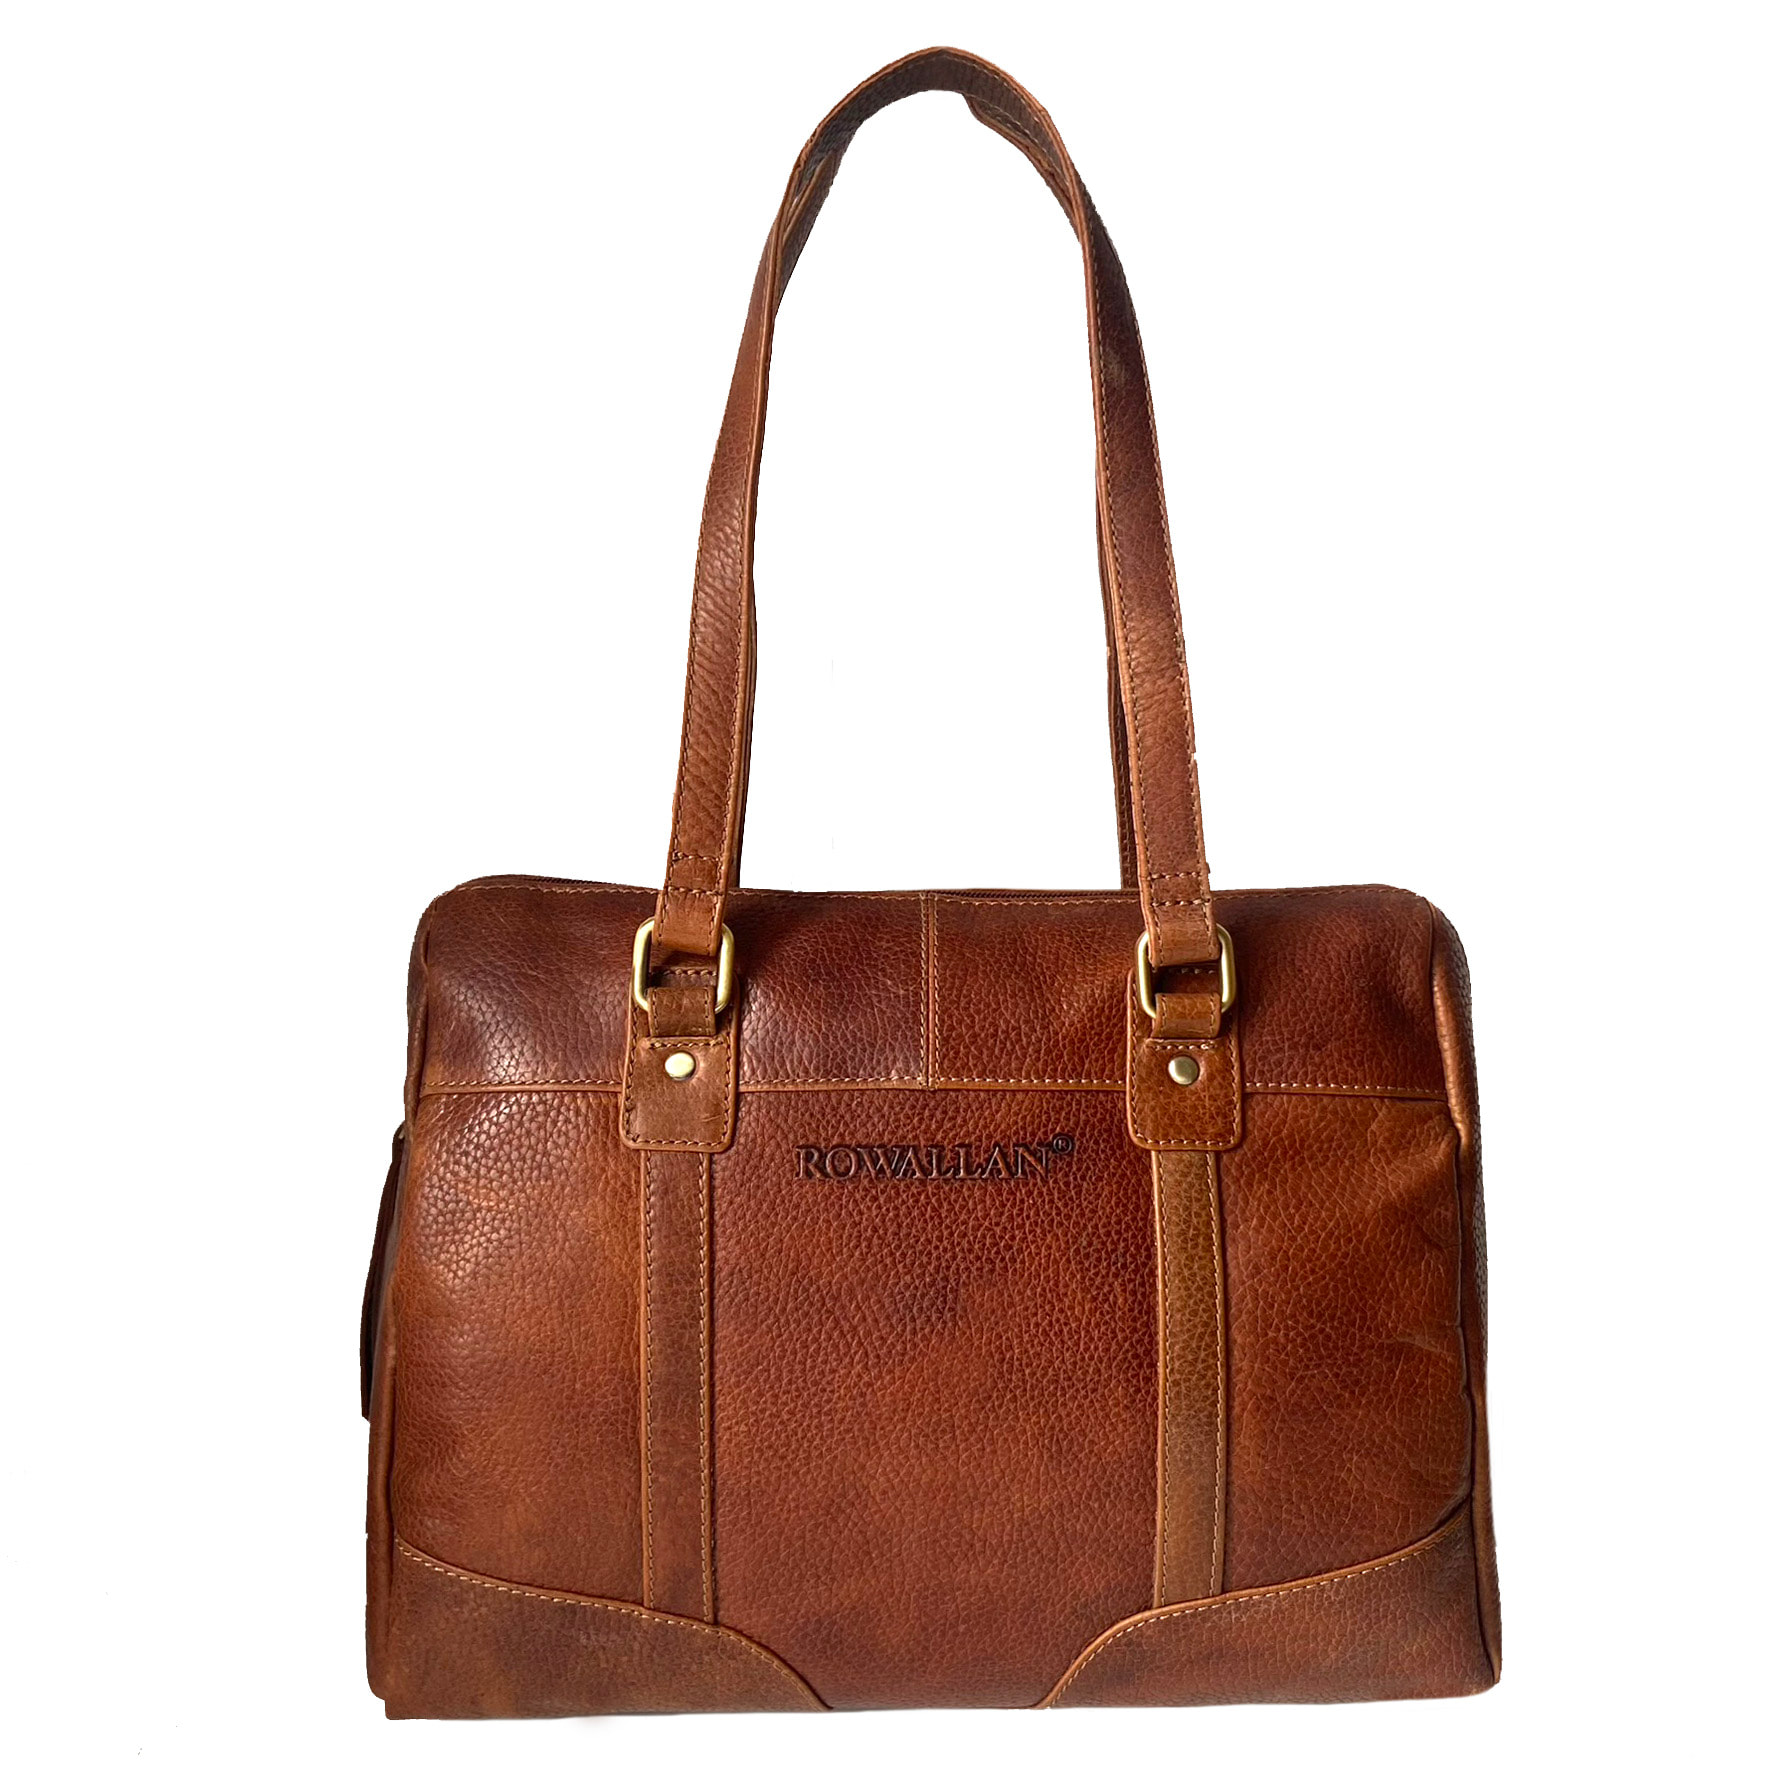 Original, Authentic, Handmade Leather Goods at discounted prices.